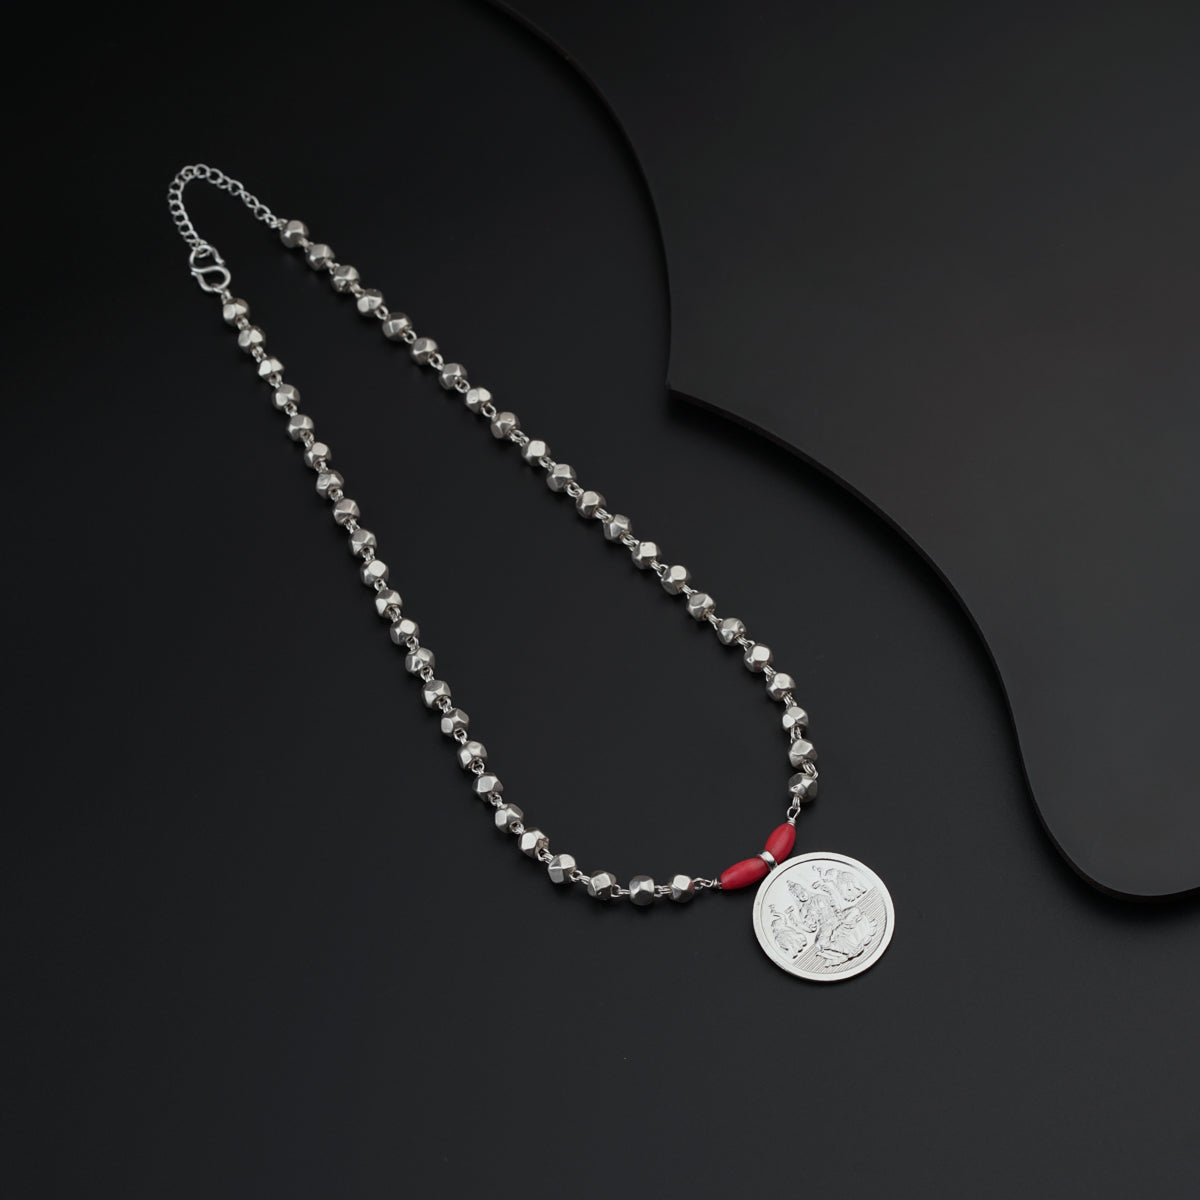 a silver chain with a coin on it